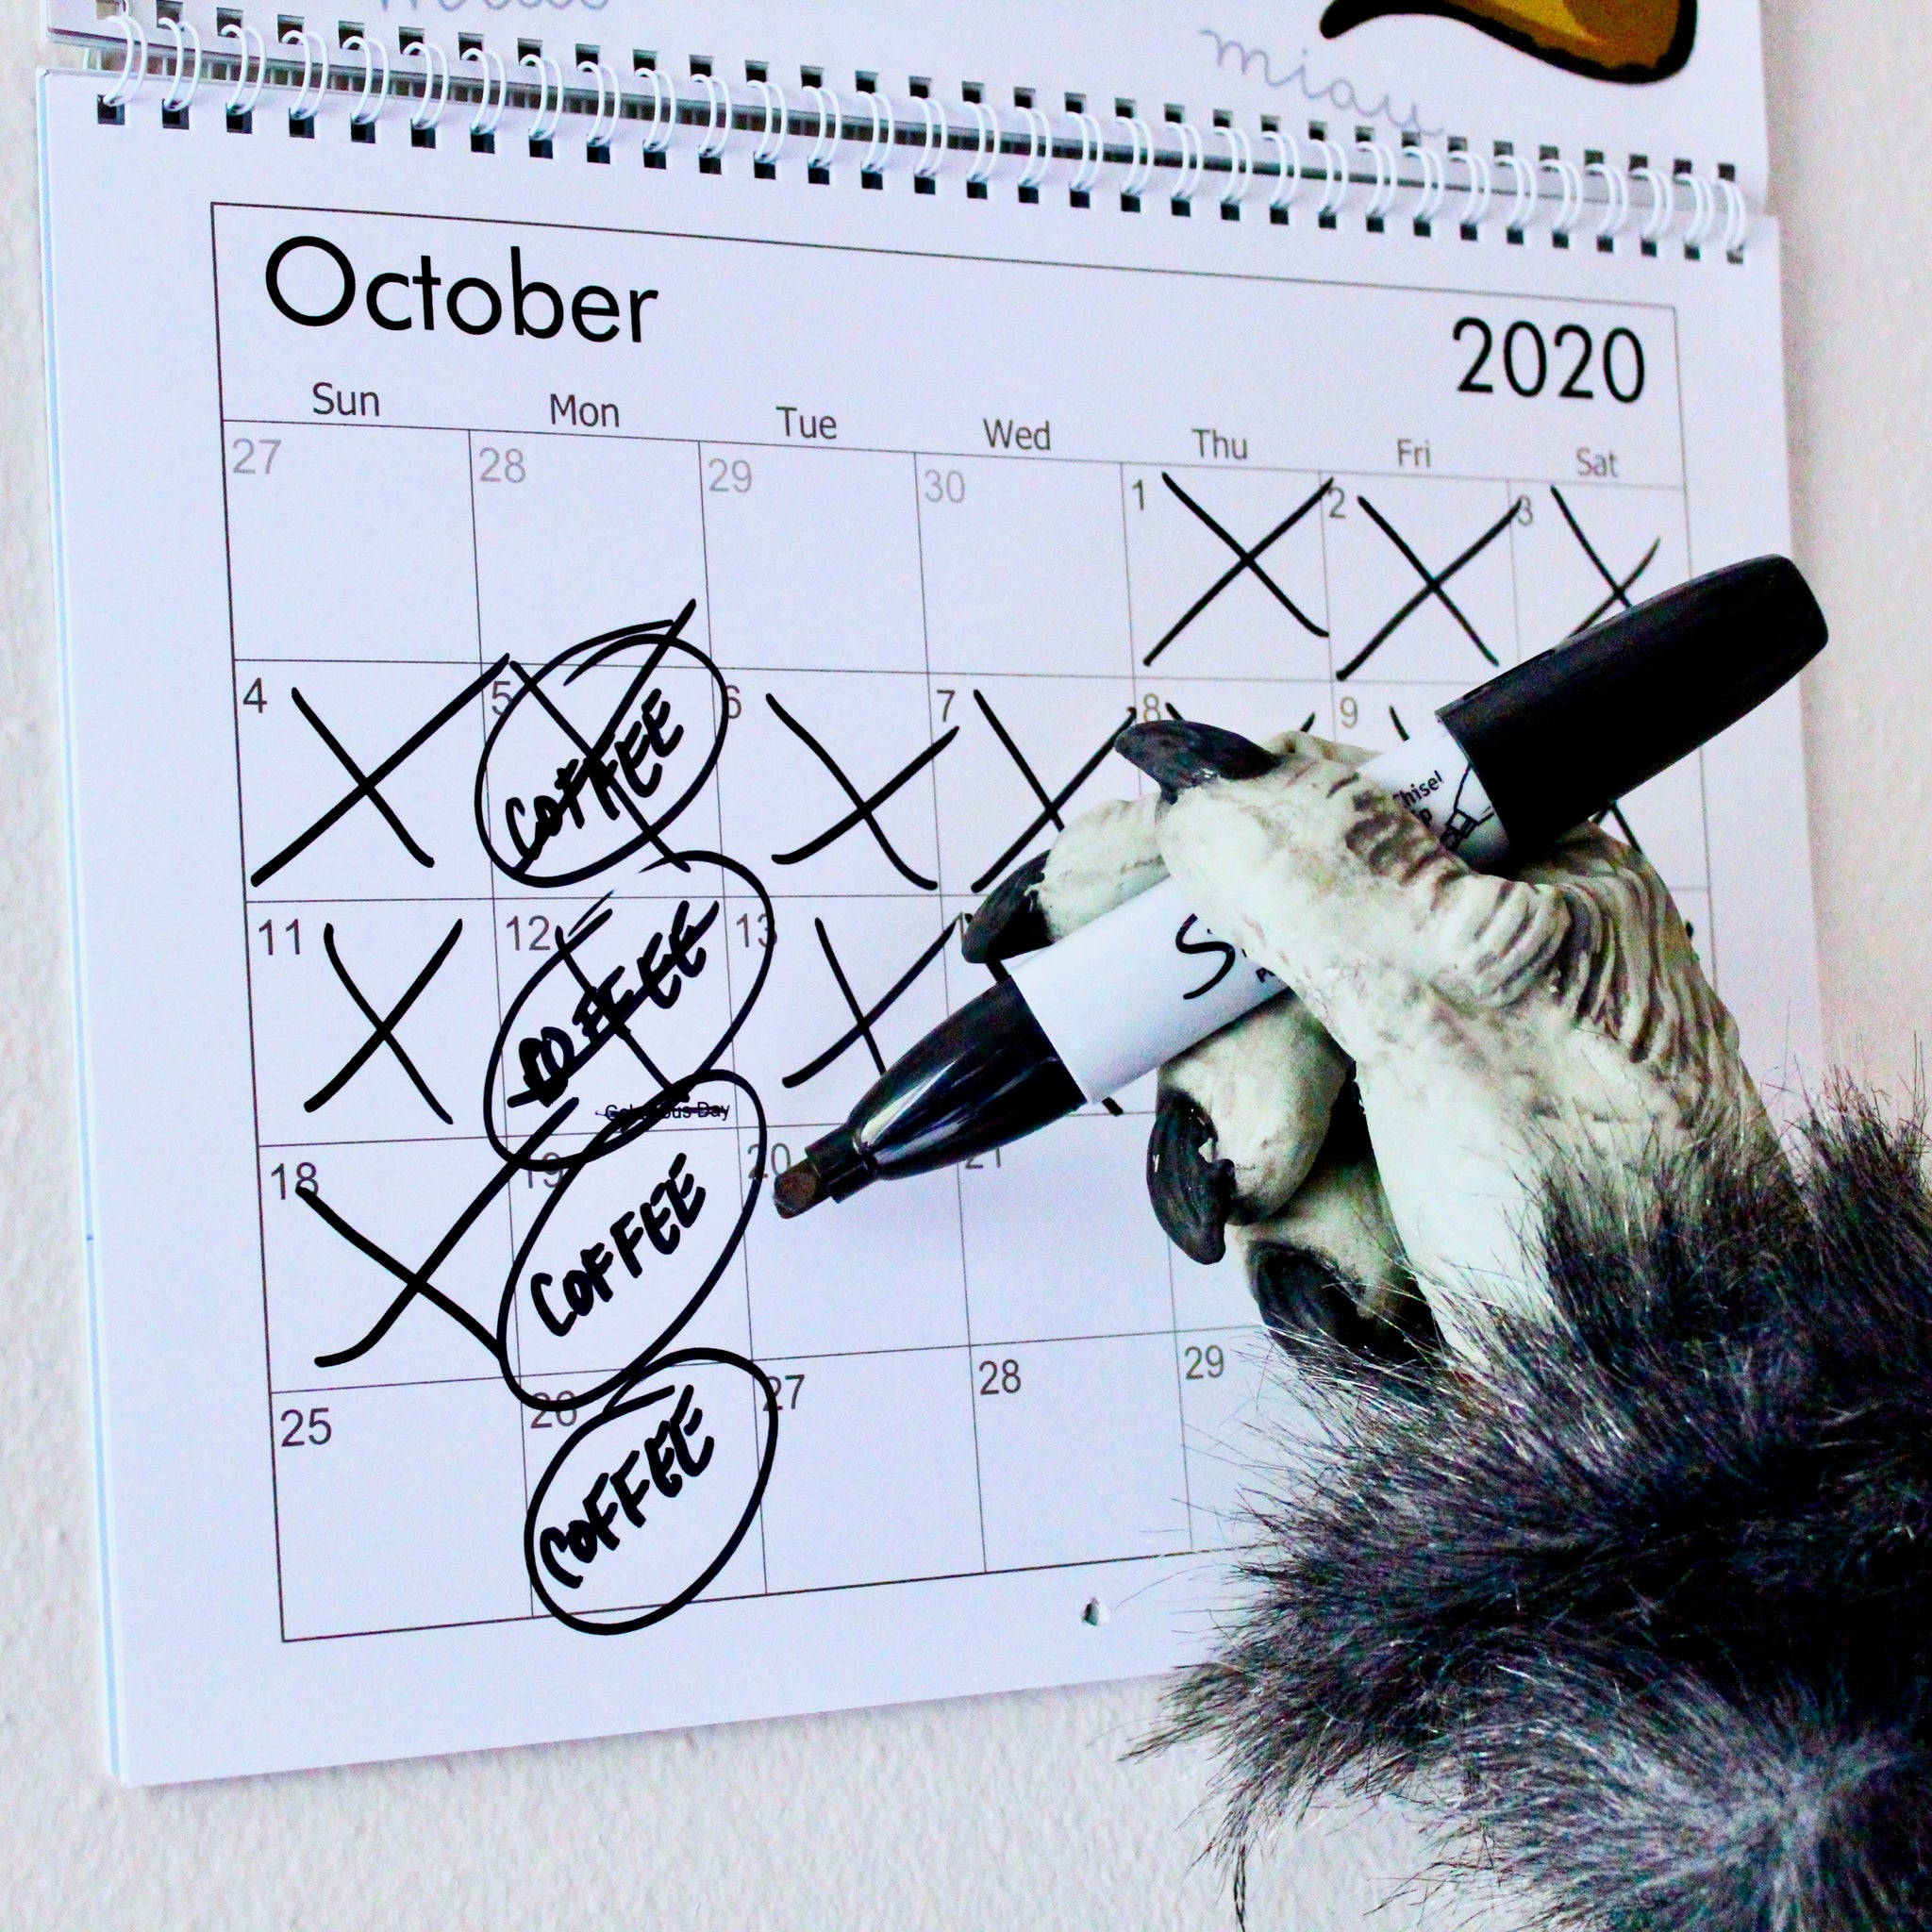 Calendar with days crossed off counting down to the next coffee delivery date.